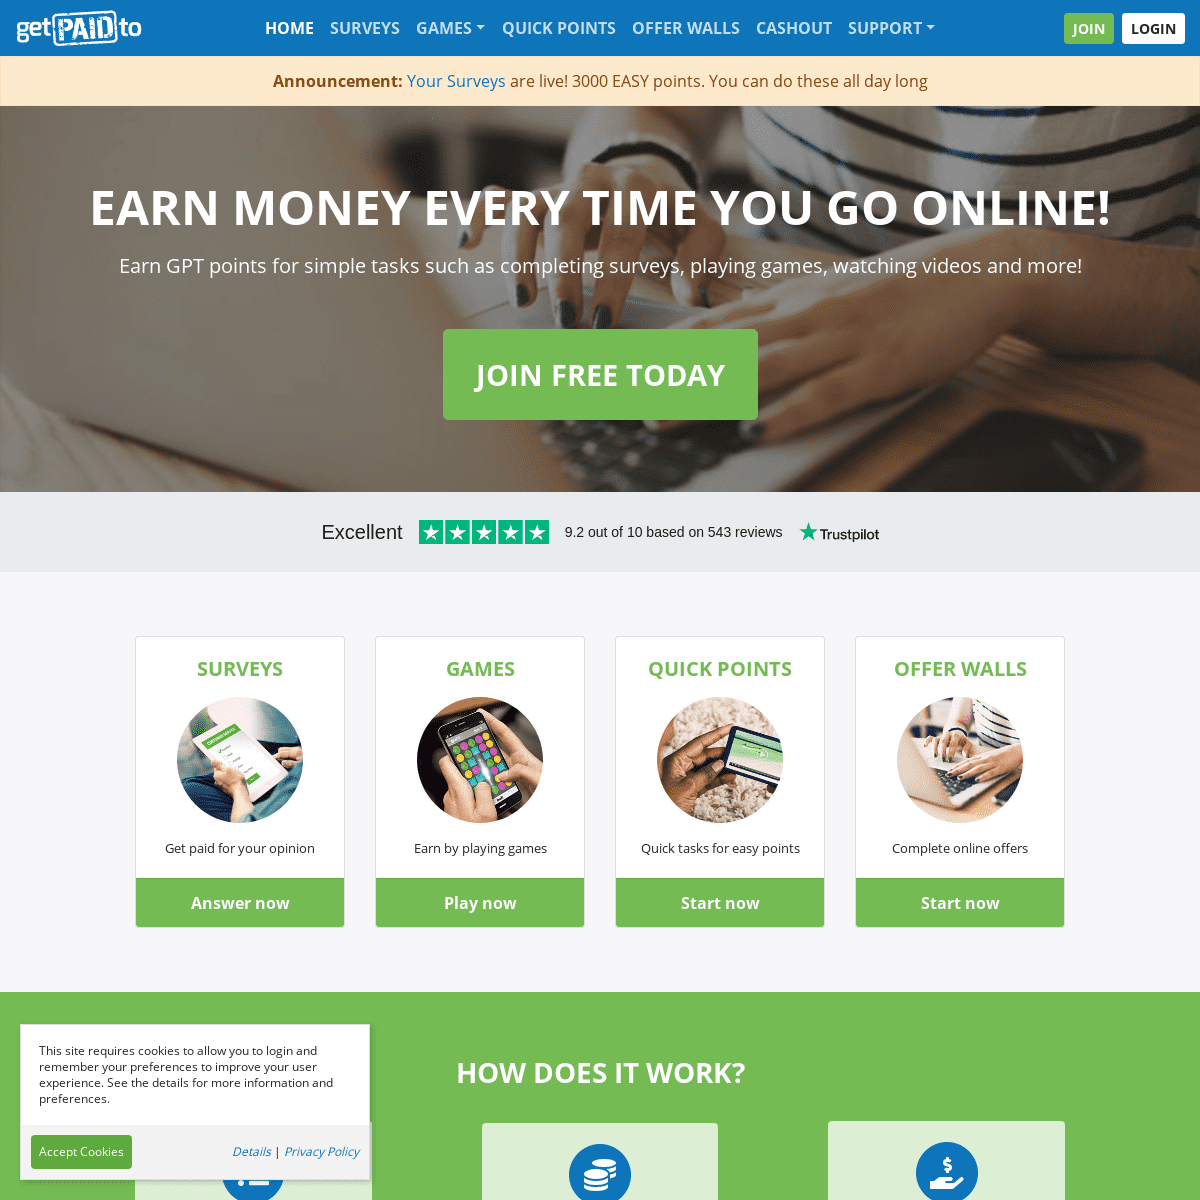 Earn money online from home | GetPaidTo